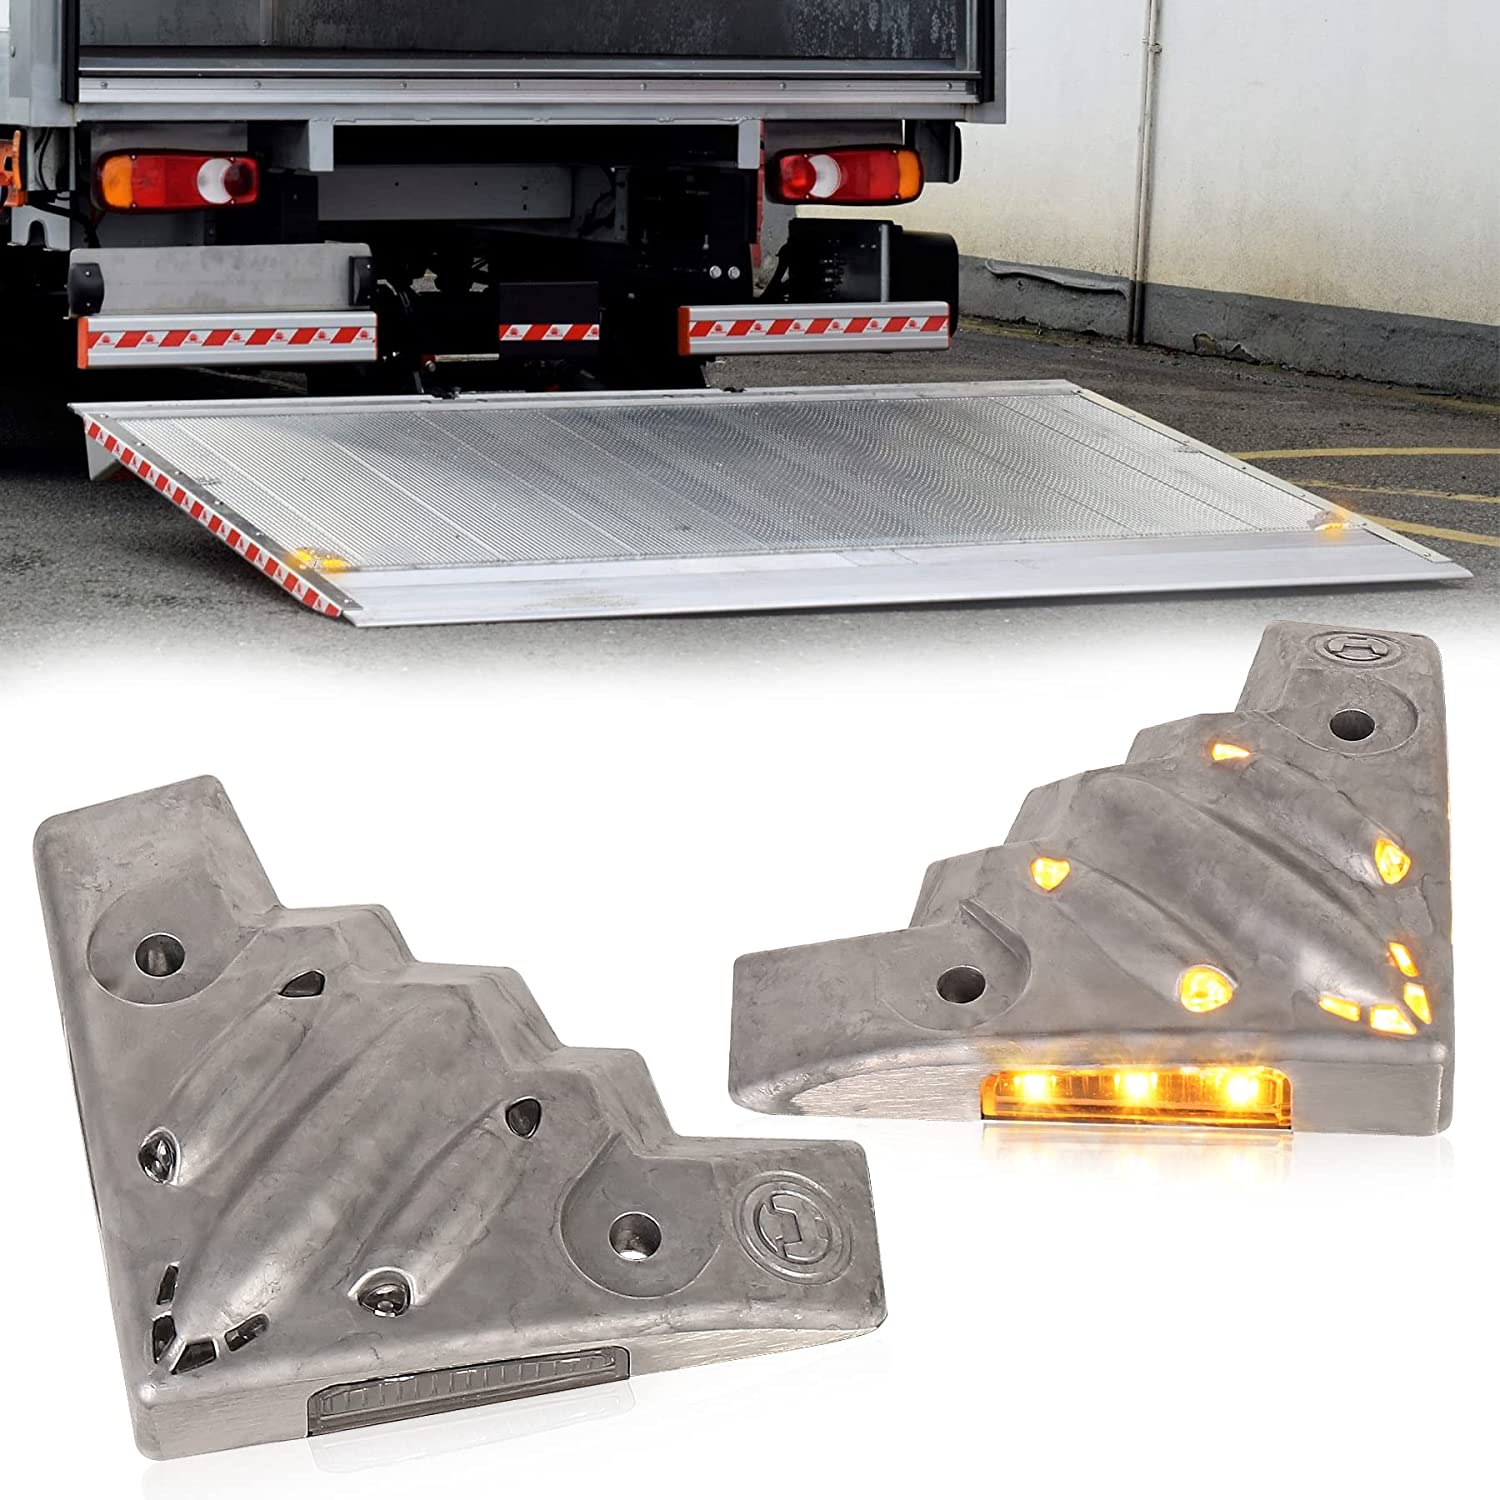 Tail Lift Warning Lights, Amber Strobe Lights with Gravity Automatic ON/OFF Battery Operated Tailgate Security Warning Lights for Lorry Van Rear Lifting Platform